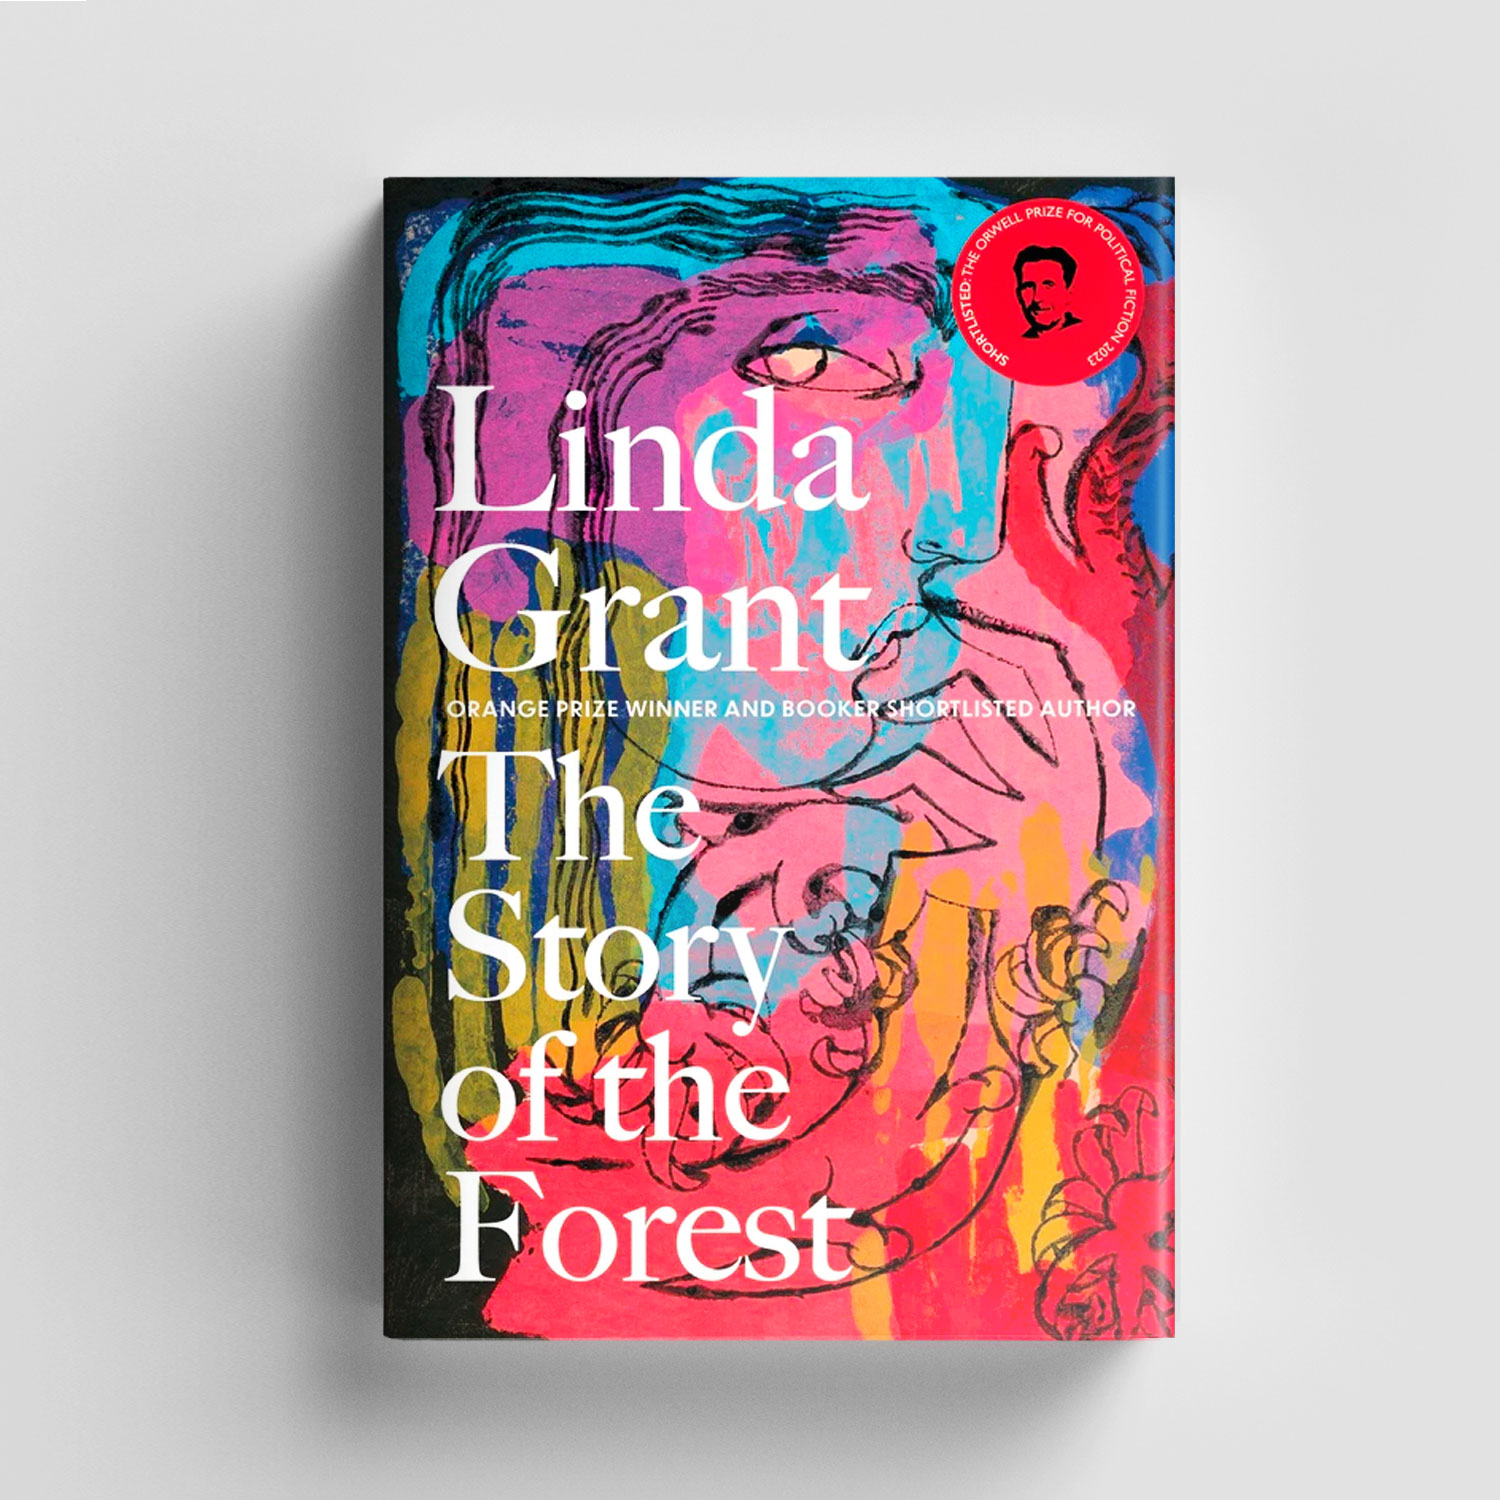 The Story of the forest by Linda Grant